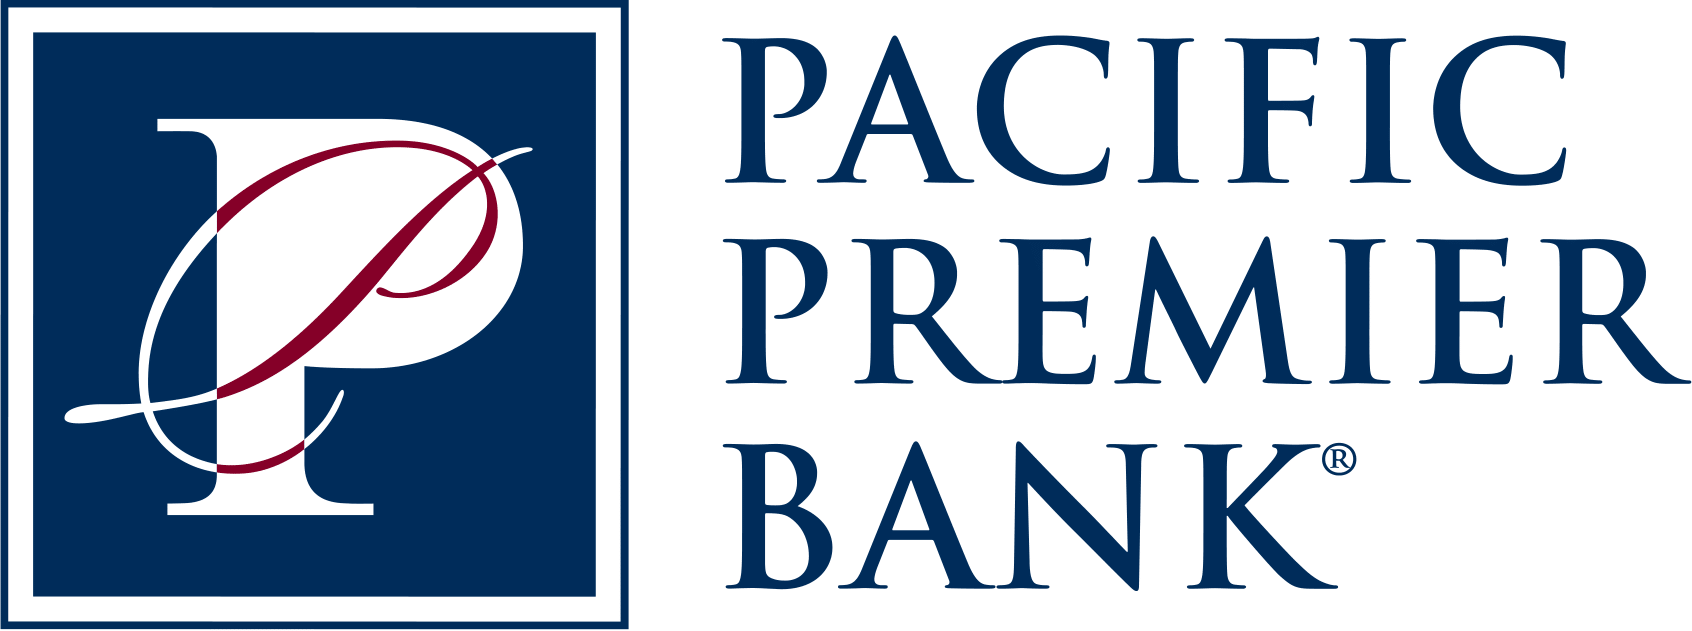 Pacific Premier Bank Logo a large white P with a smaller cursive letter p going through it